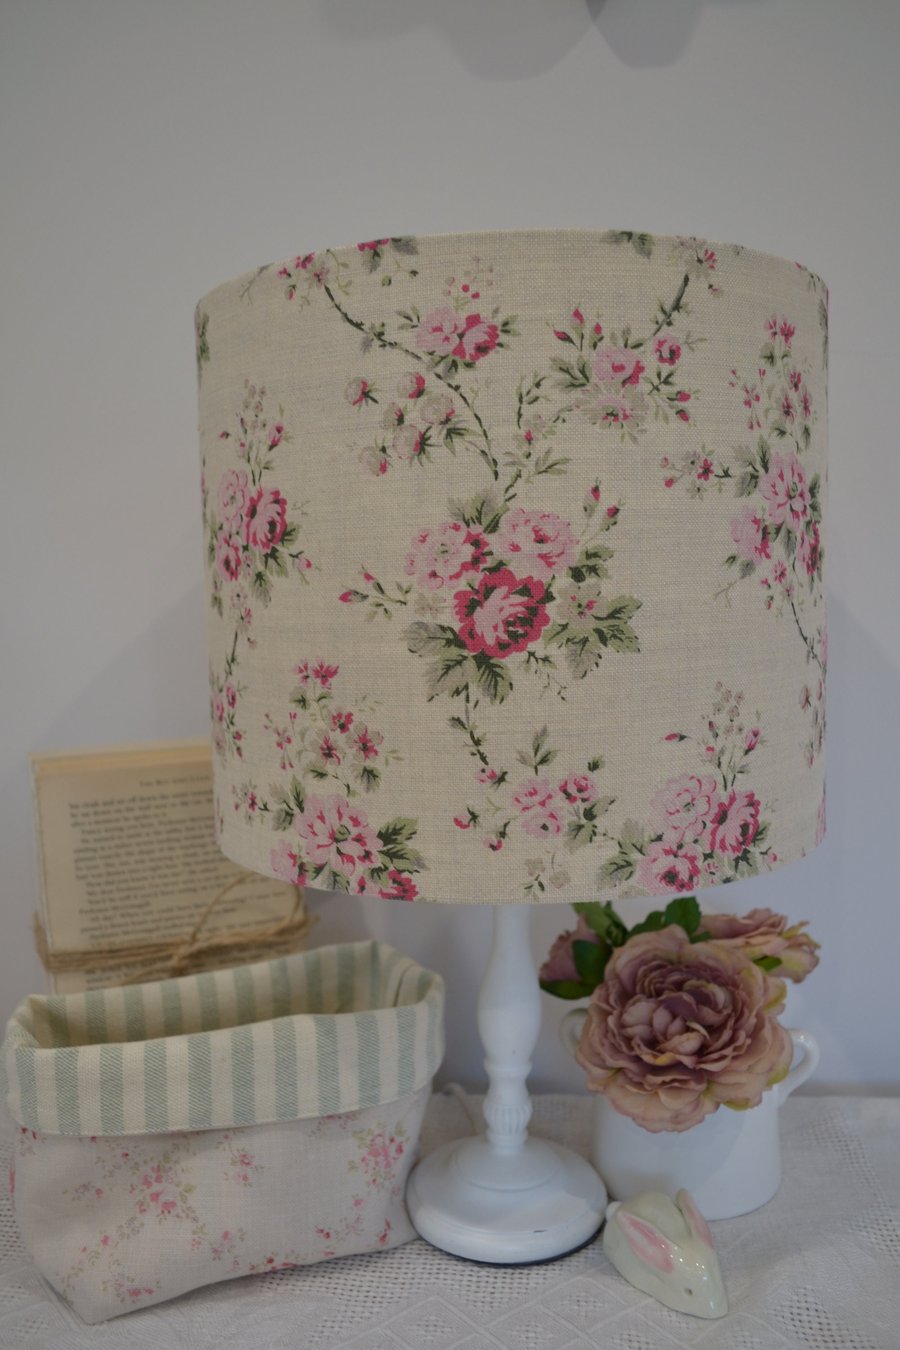 Olive and Daisy Lampshade - Country Roses linen lampshade 25cm drum